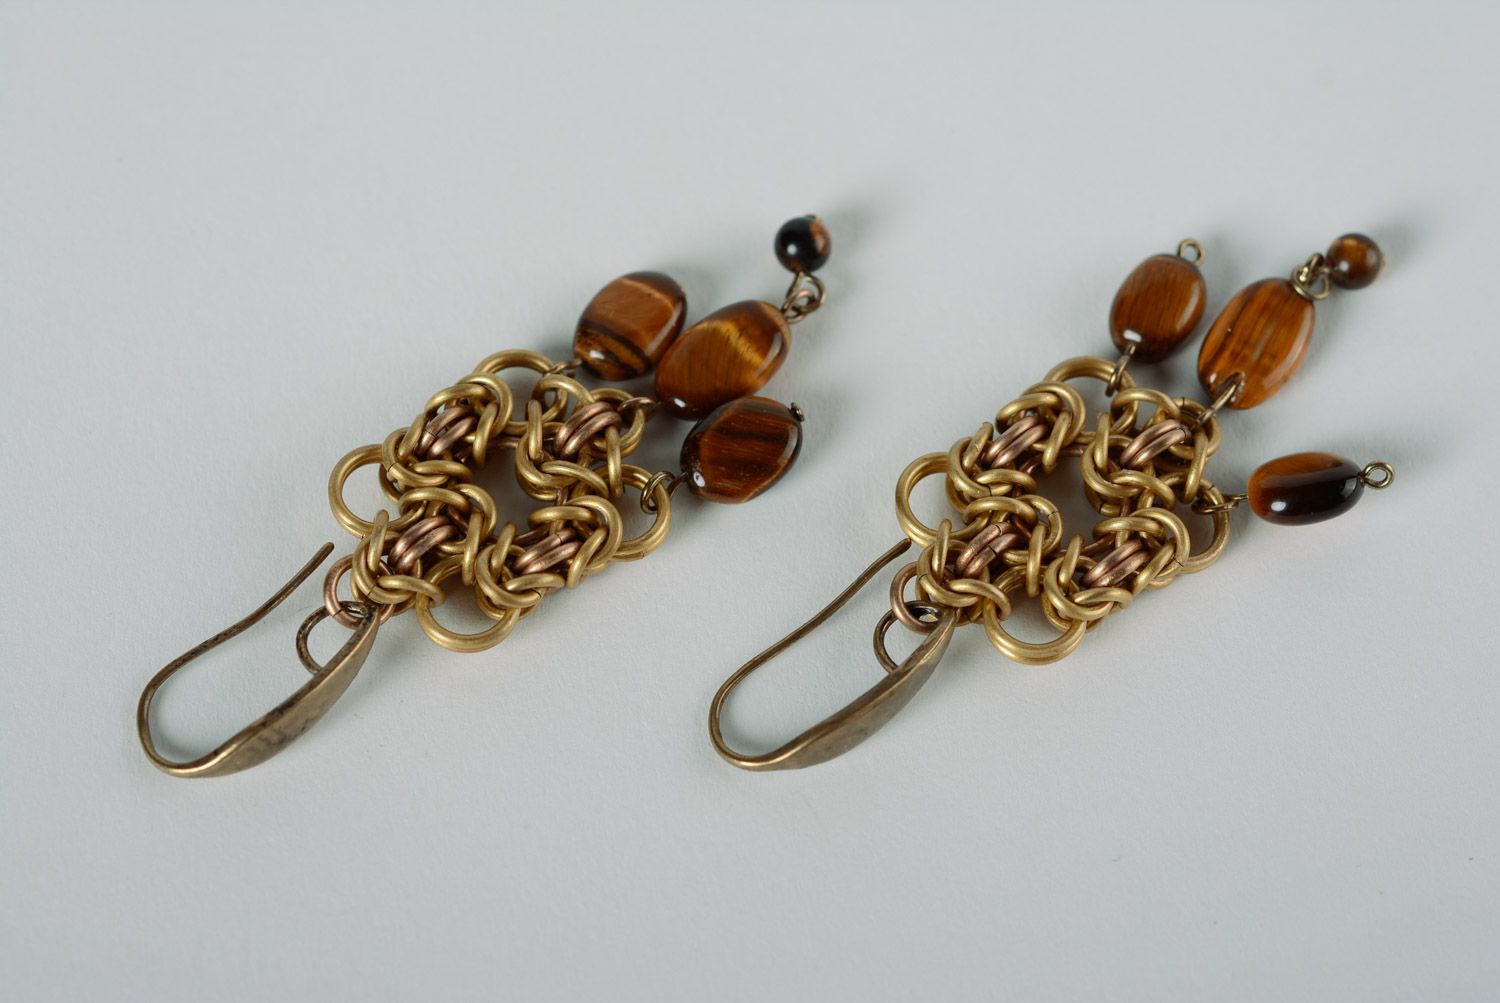 Handmade chainmaille metal earrings with tiger's eye stone photo 3